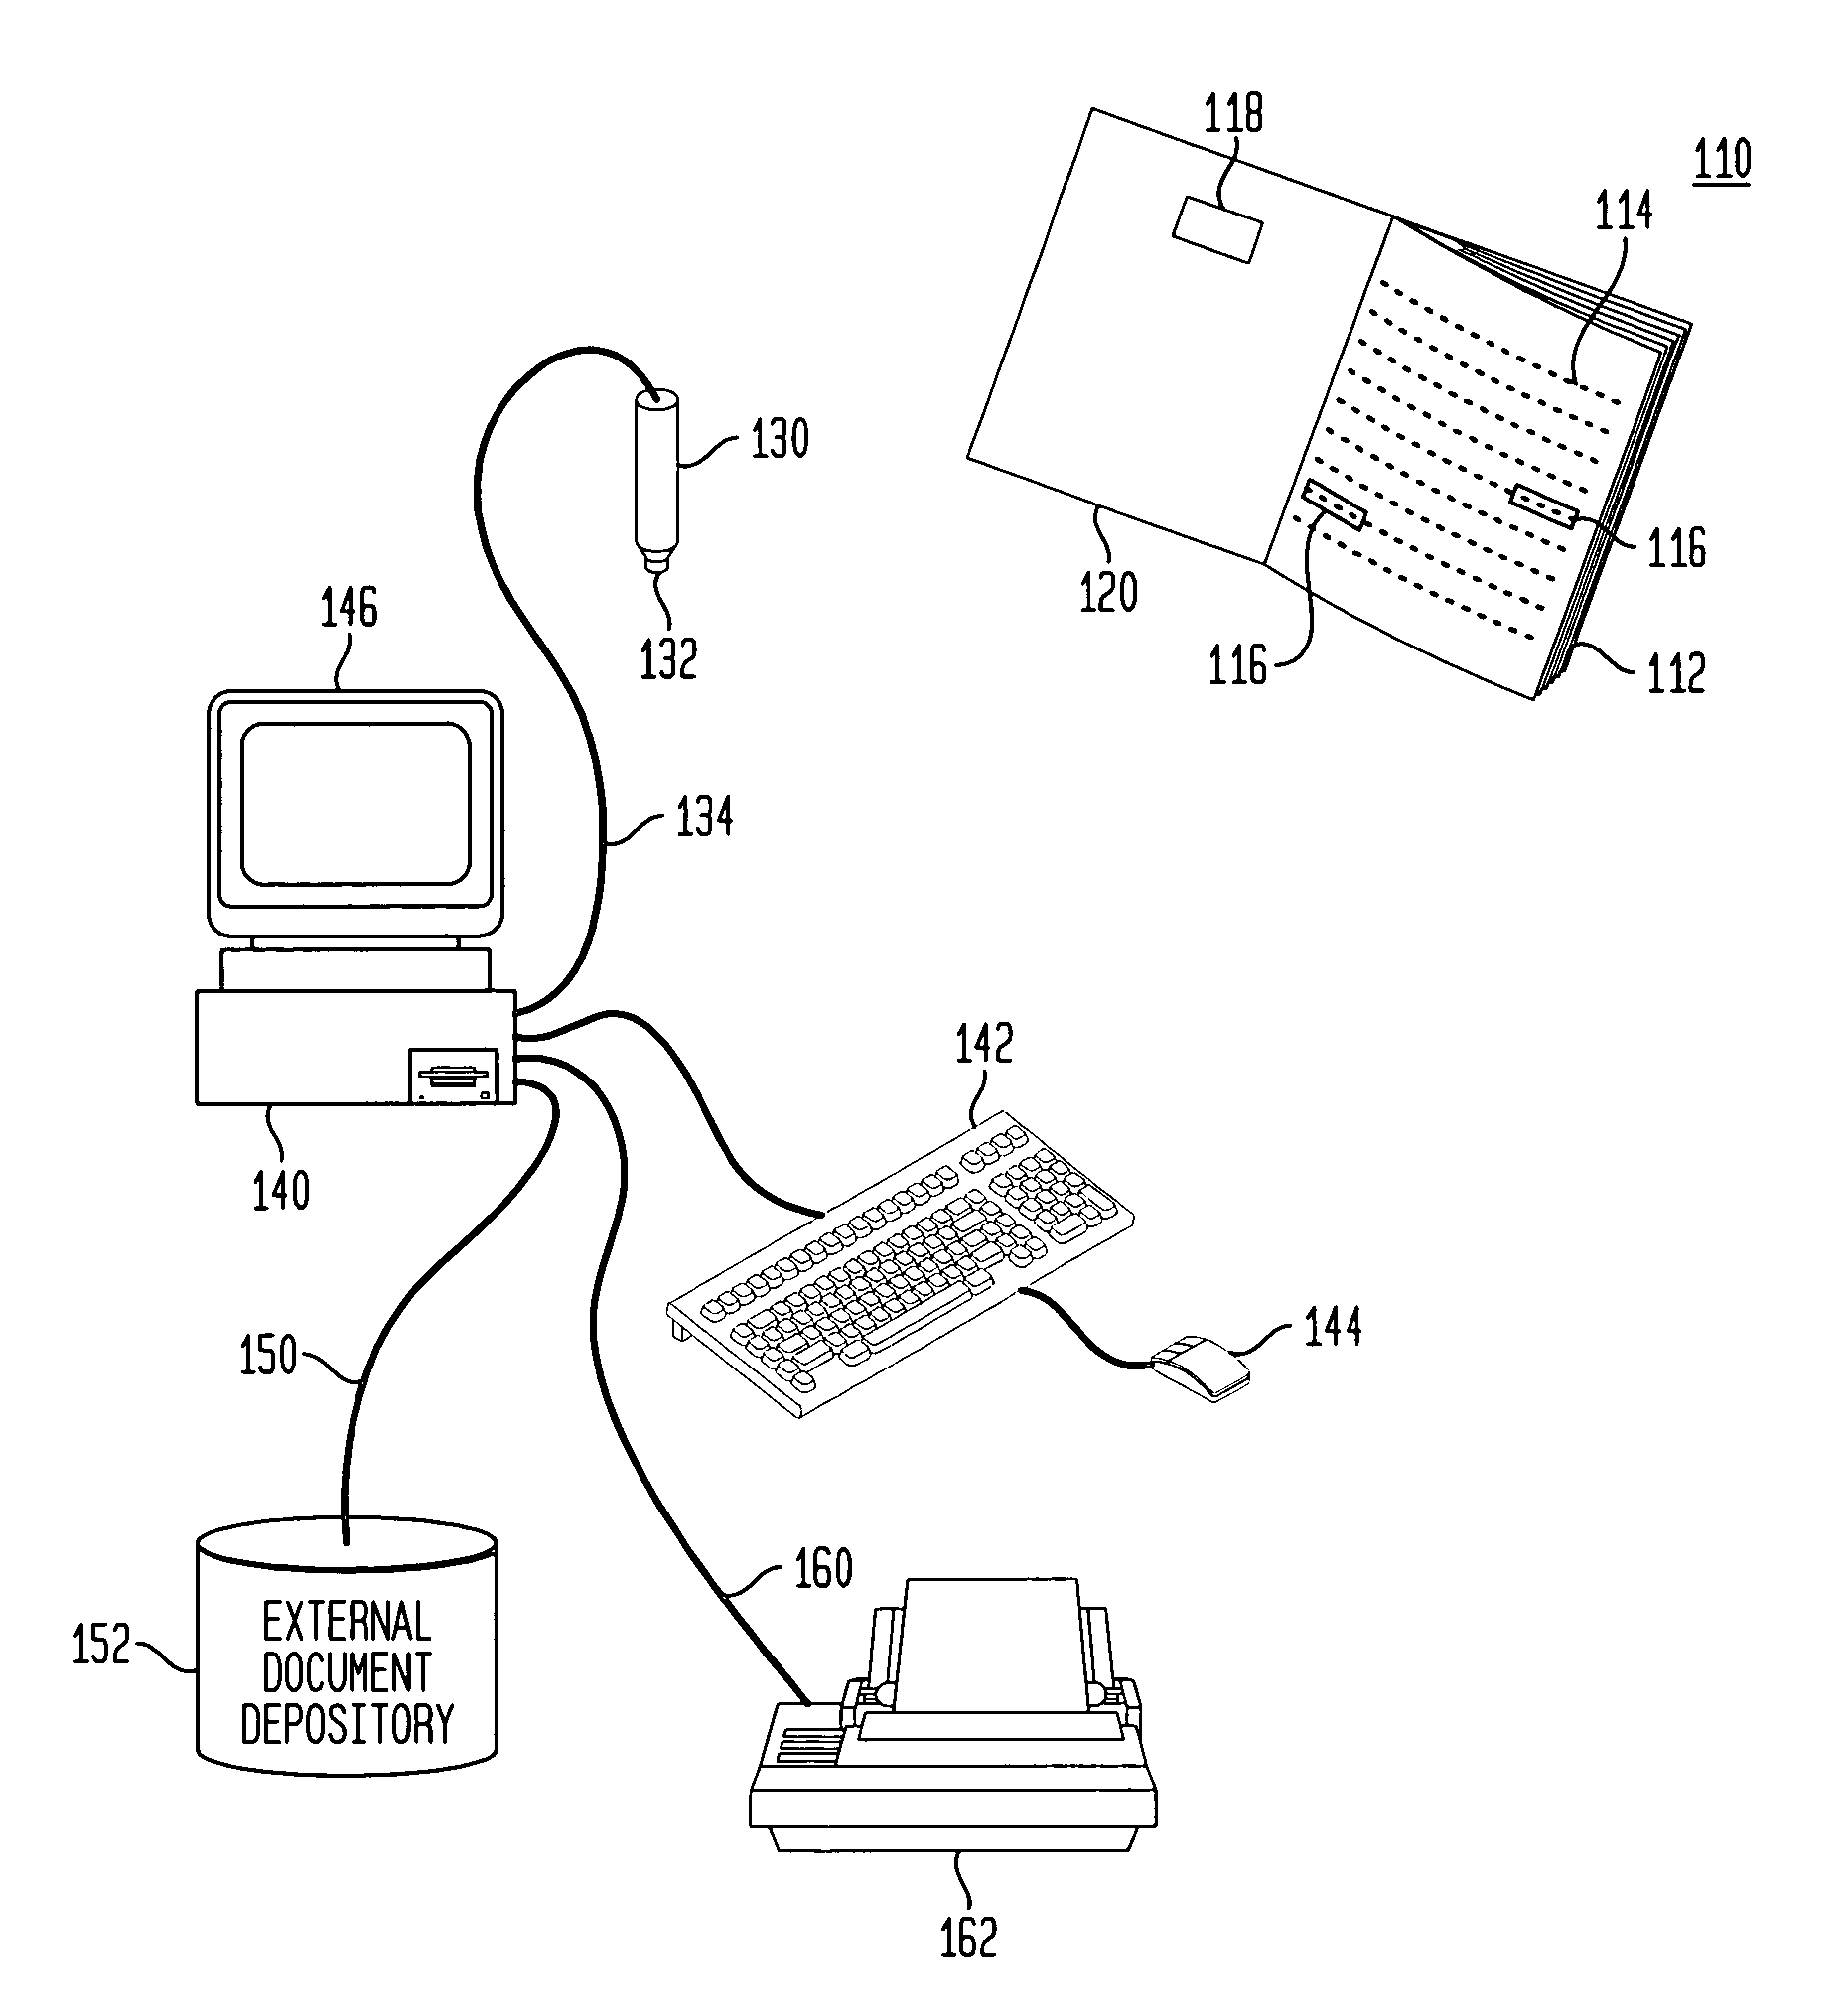 Retrieval and manipulation of electronically stored information via pointers embedded in the associated printed material